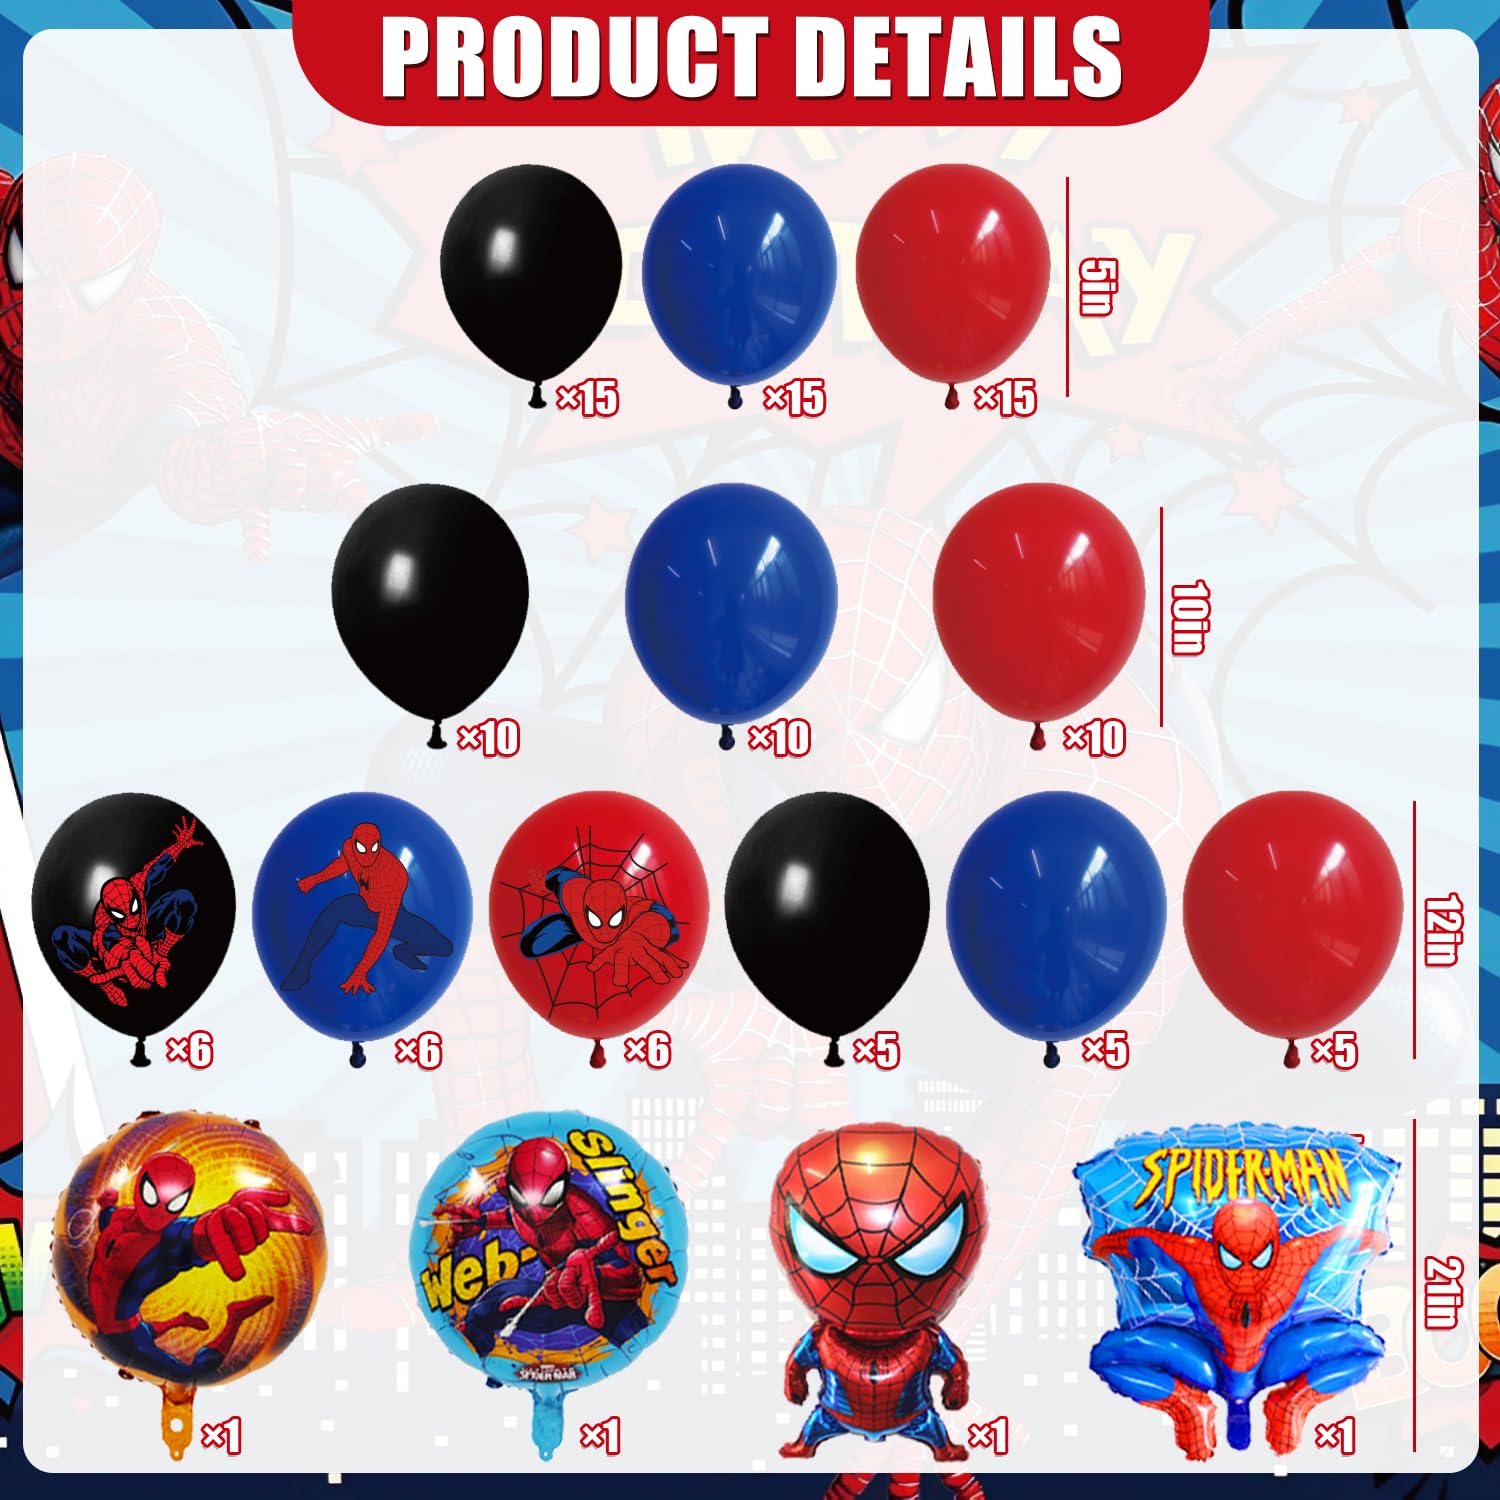 Red Spider Hero Balloons Party Supplies Arch Garland Kit, Red Spider Backdrop, Tablecloth, Cupcake Toppers,for Baby Shower Birthday Graduation Anniversary Party Decorations